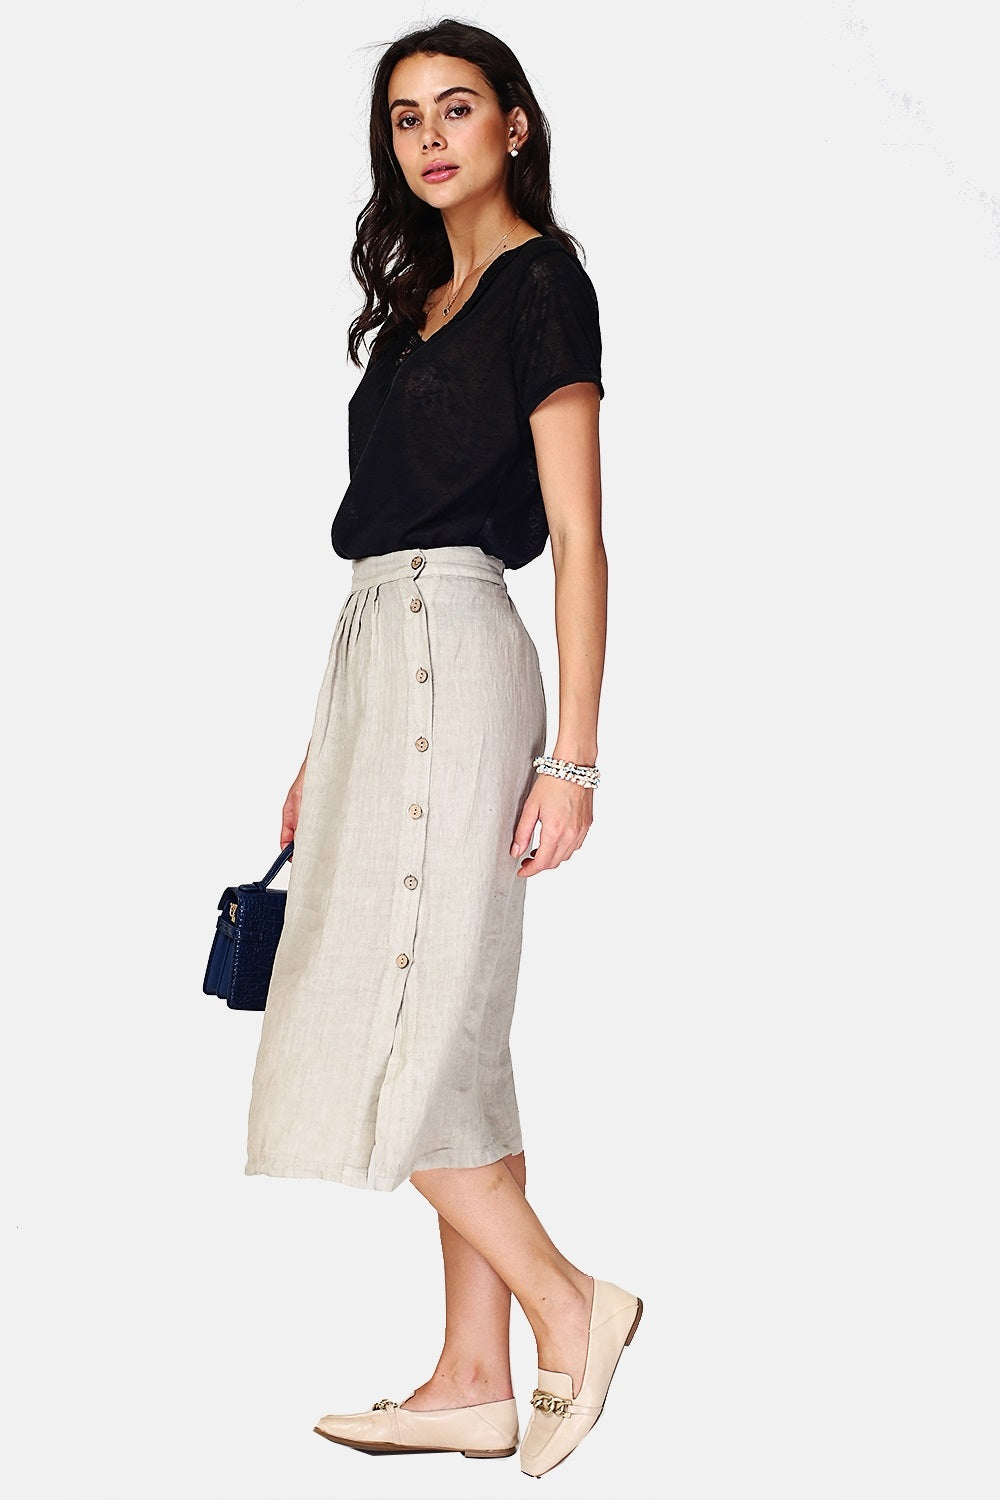 Wrap skirt pleats in front wooden buttoning